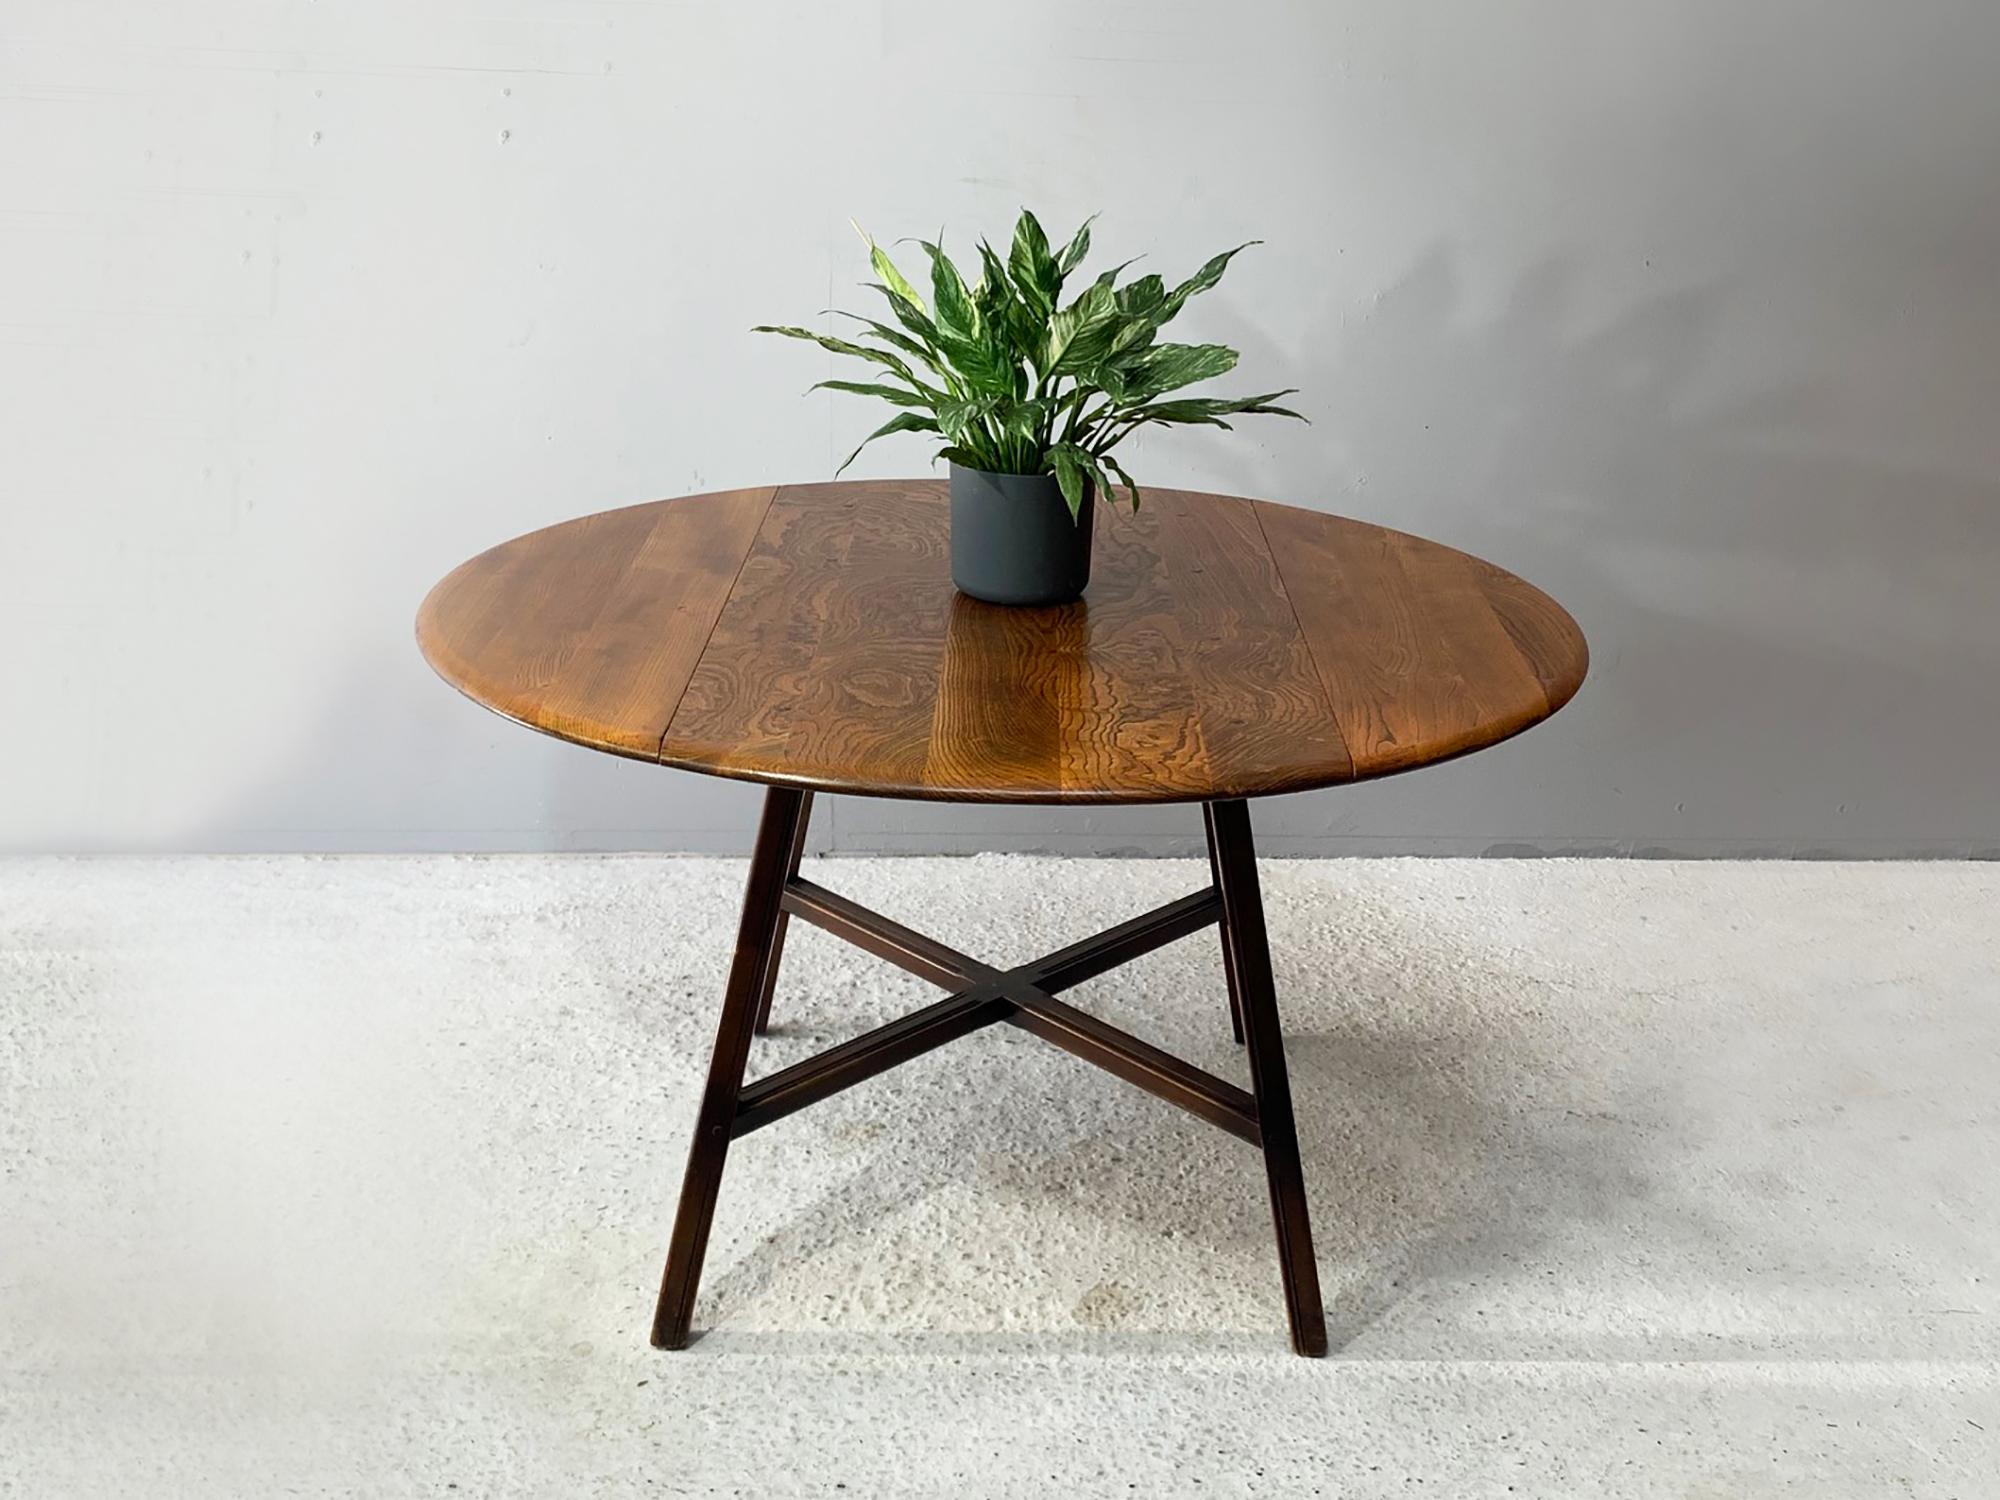 Designed by Lucian R Ercolani, the Ercol Old Colonial table is an earlier and rarer design than more recent Ercol tables. Produced in the 1960’s It has the ‘blue label’ which was only used between 1955 and 1975.  It is well used but in great